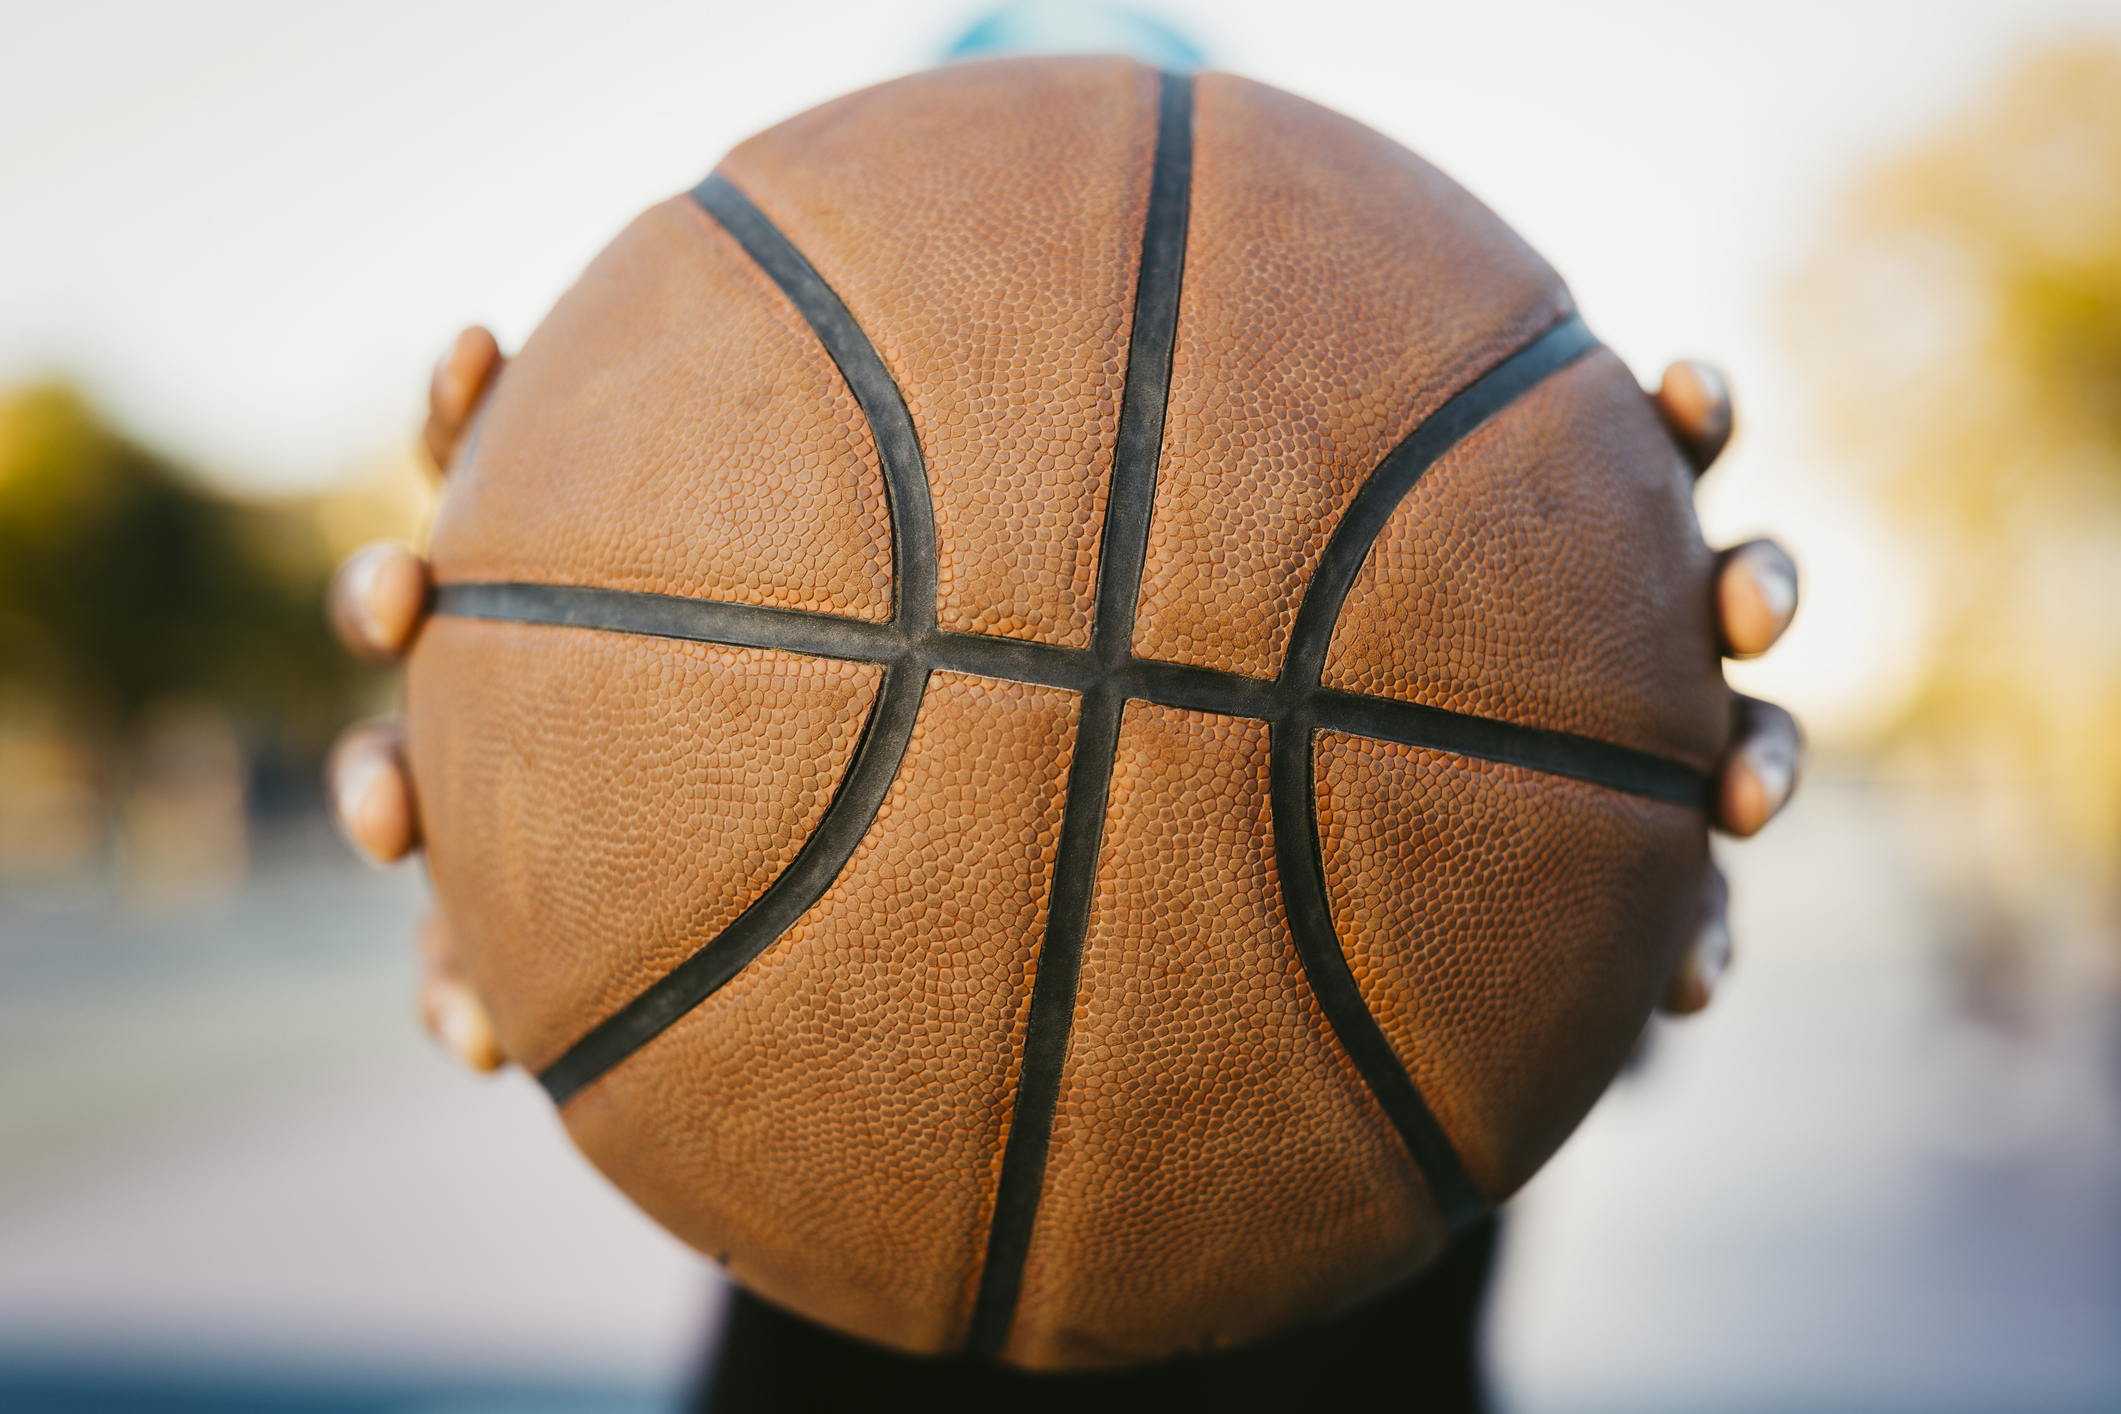 Close-up of a person holding a basketball blocking their face